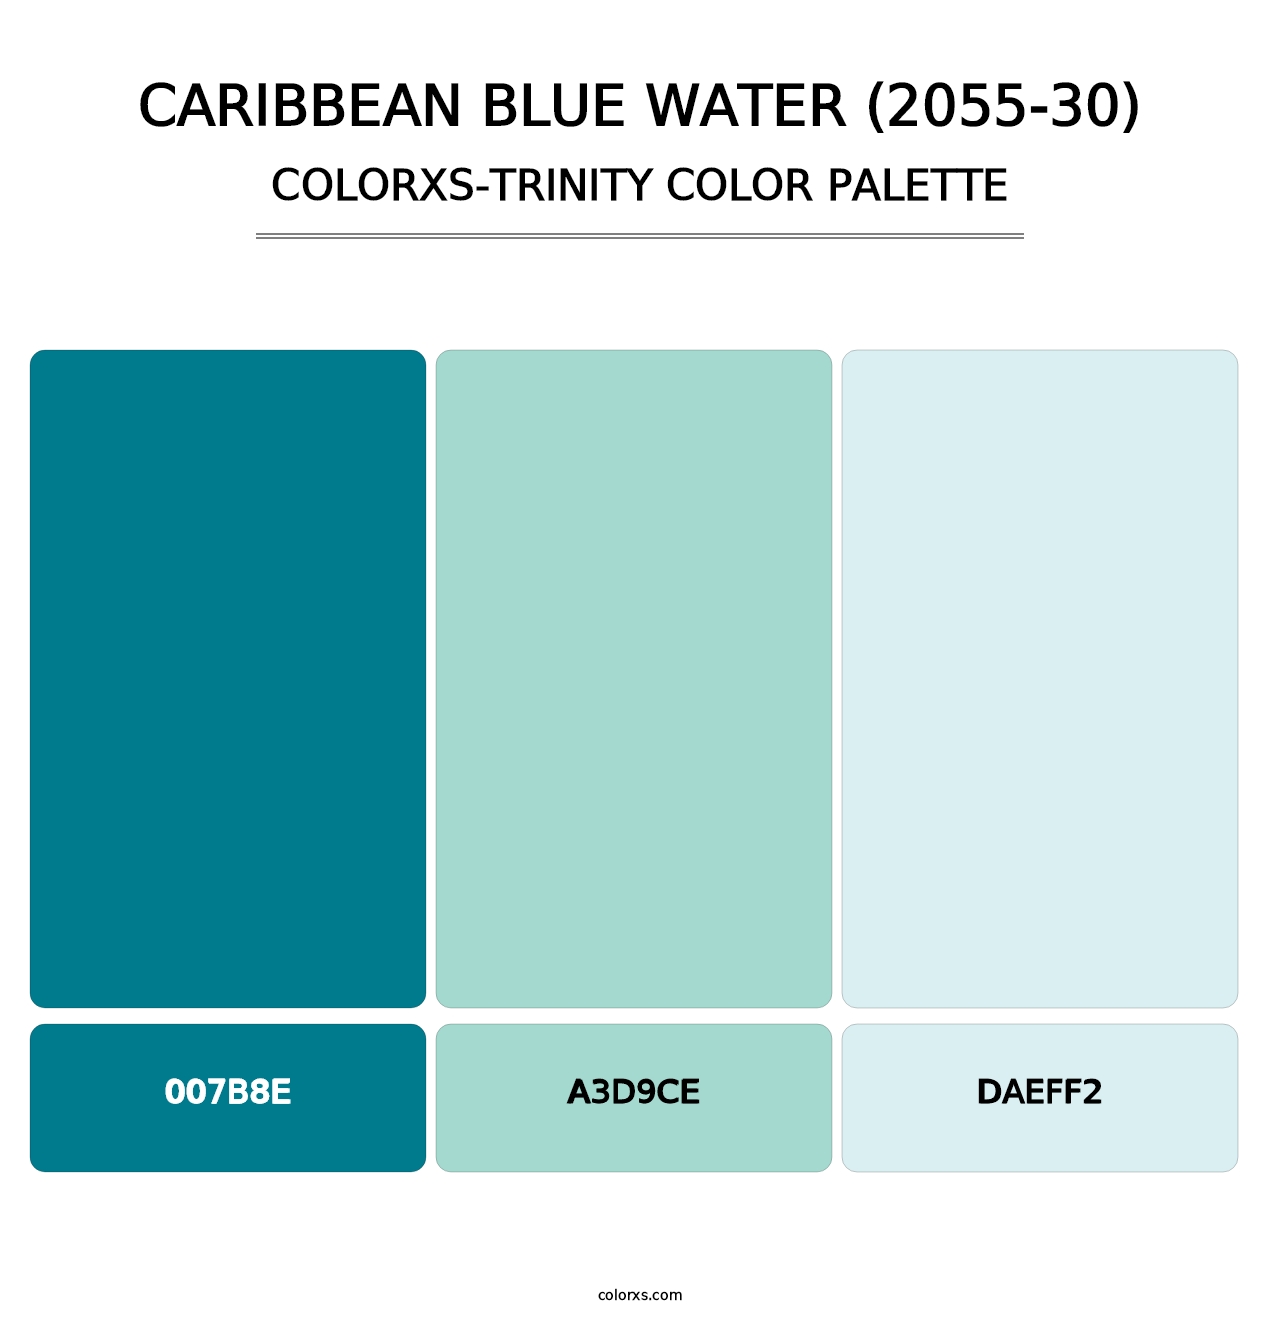 Caribbean Blue Water (2055-30) - Colorxs Trinity Palette